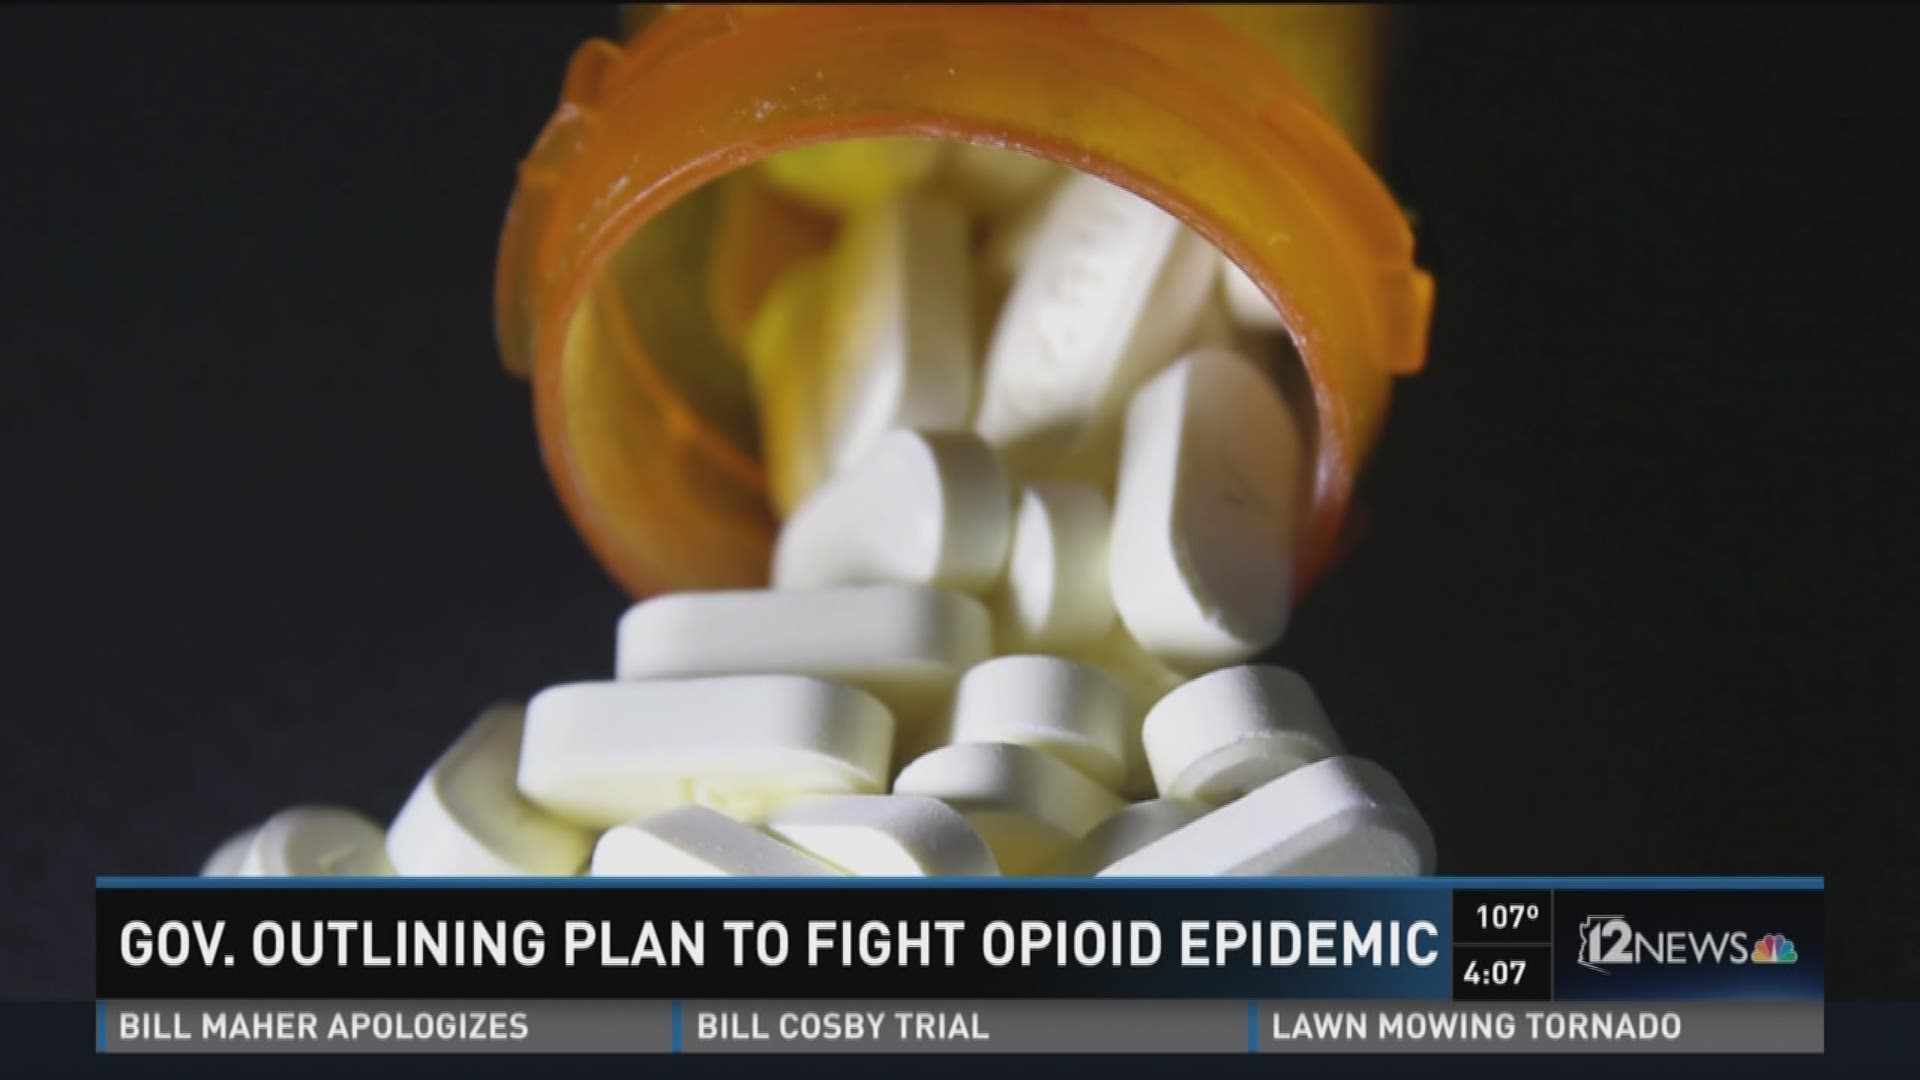 Gov. Ducey released an emergency declaration to combat the opioid epidemic in Arizona.